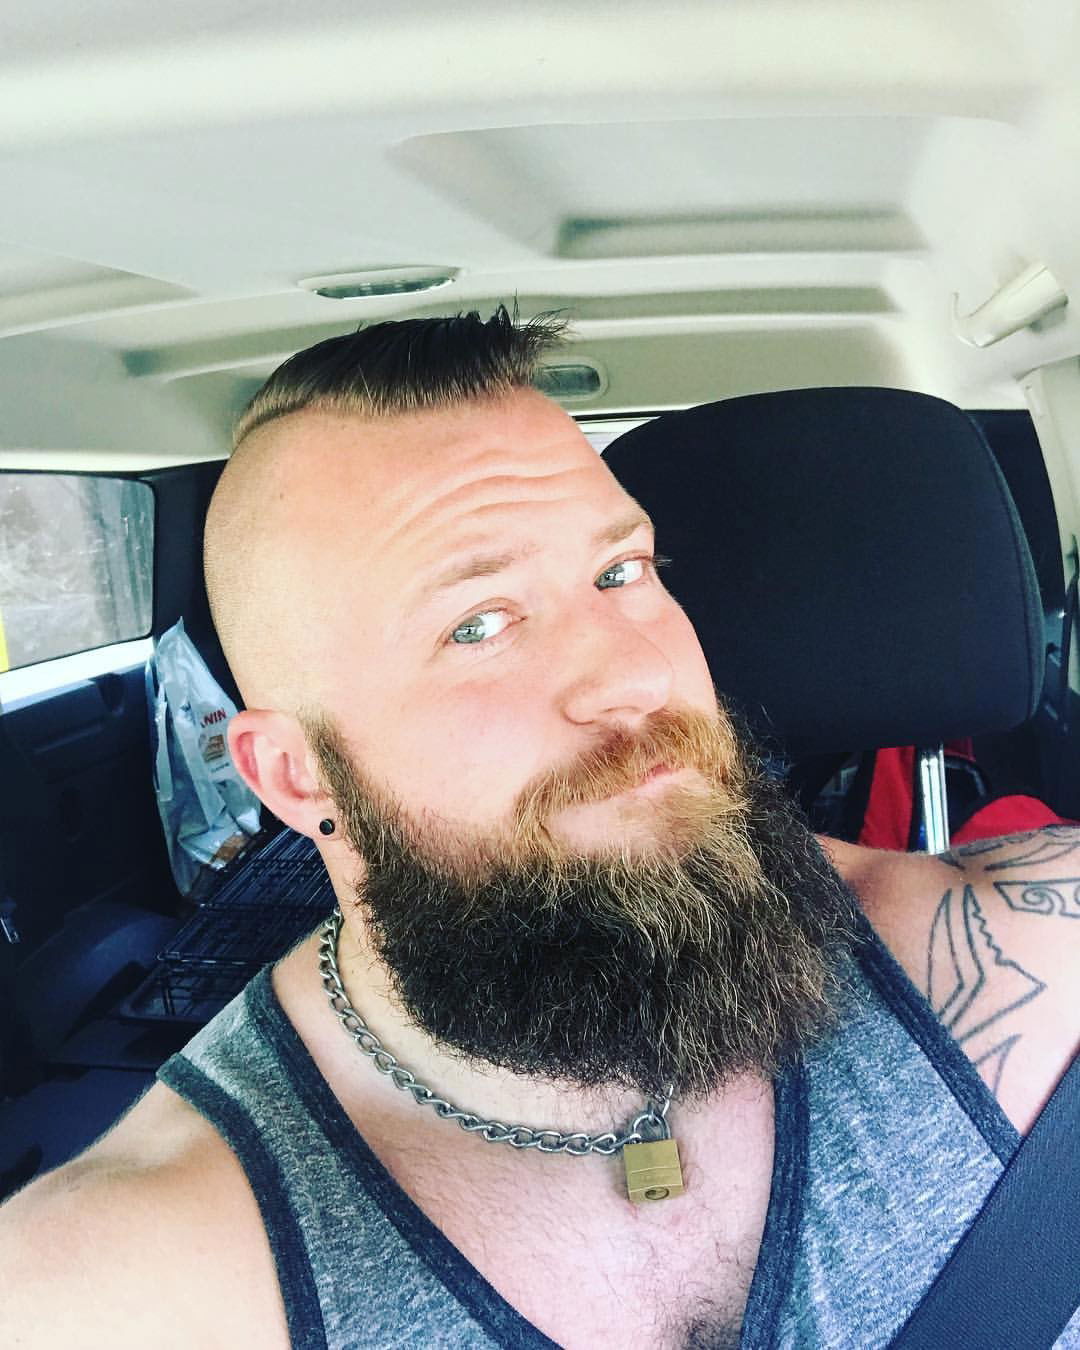 Photo by Nastyfistpig32 with the username @Nastyfistpig32,  May 25, 2018 at 11:55 PM and the text says 'jaydawgx:

dylanspeaks:

Happy Wednesday y’all. 

#gaybear #gaybear #gaypup #thebearmag #bearsofinstagram #bearweek365 #bearscubsnbeards #bearscubsandbeards #bearscubsandscruff #musclebear #musclepup #ruggerpup #ruggerbear

What a sexy pup!  And he’s a..'